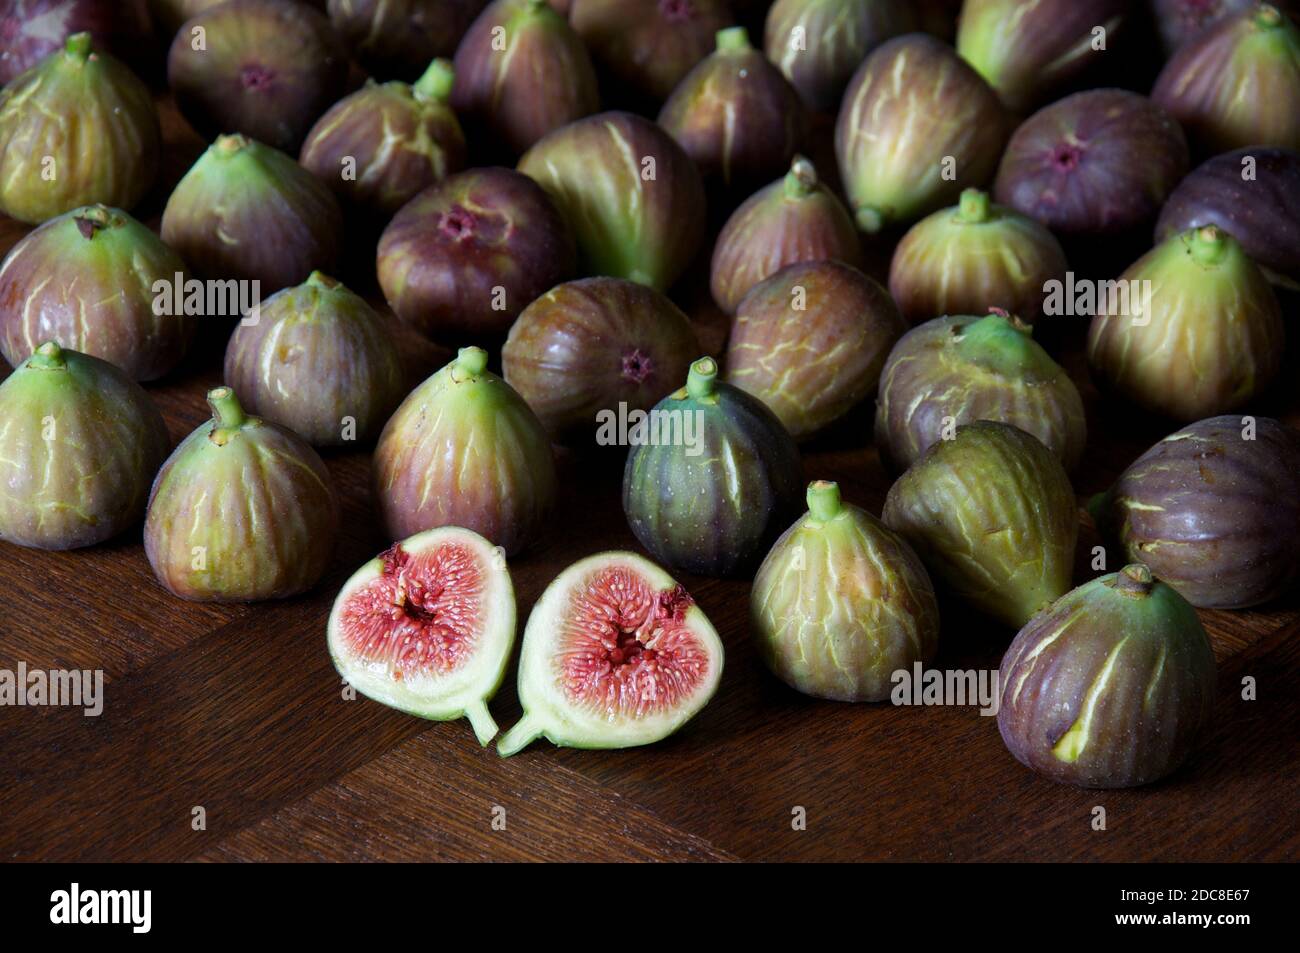 A freshly picked fig “Ficus carica” cut in half to reveal the seeds and succulent red flesh. Against a background of figs laid out on a wooden table. Stock Photo